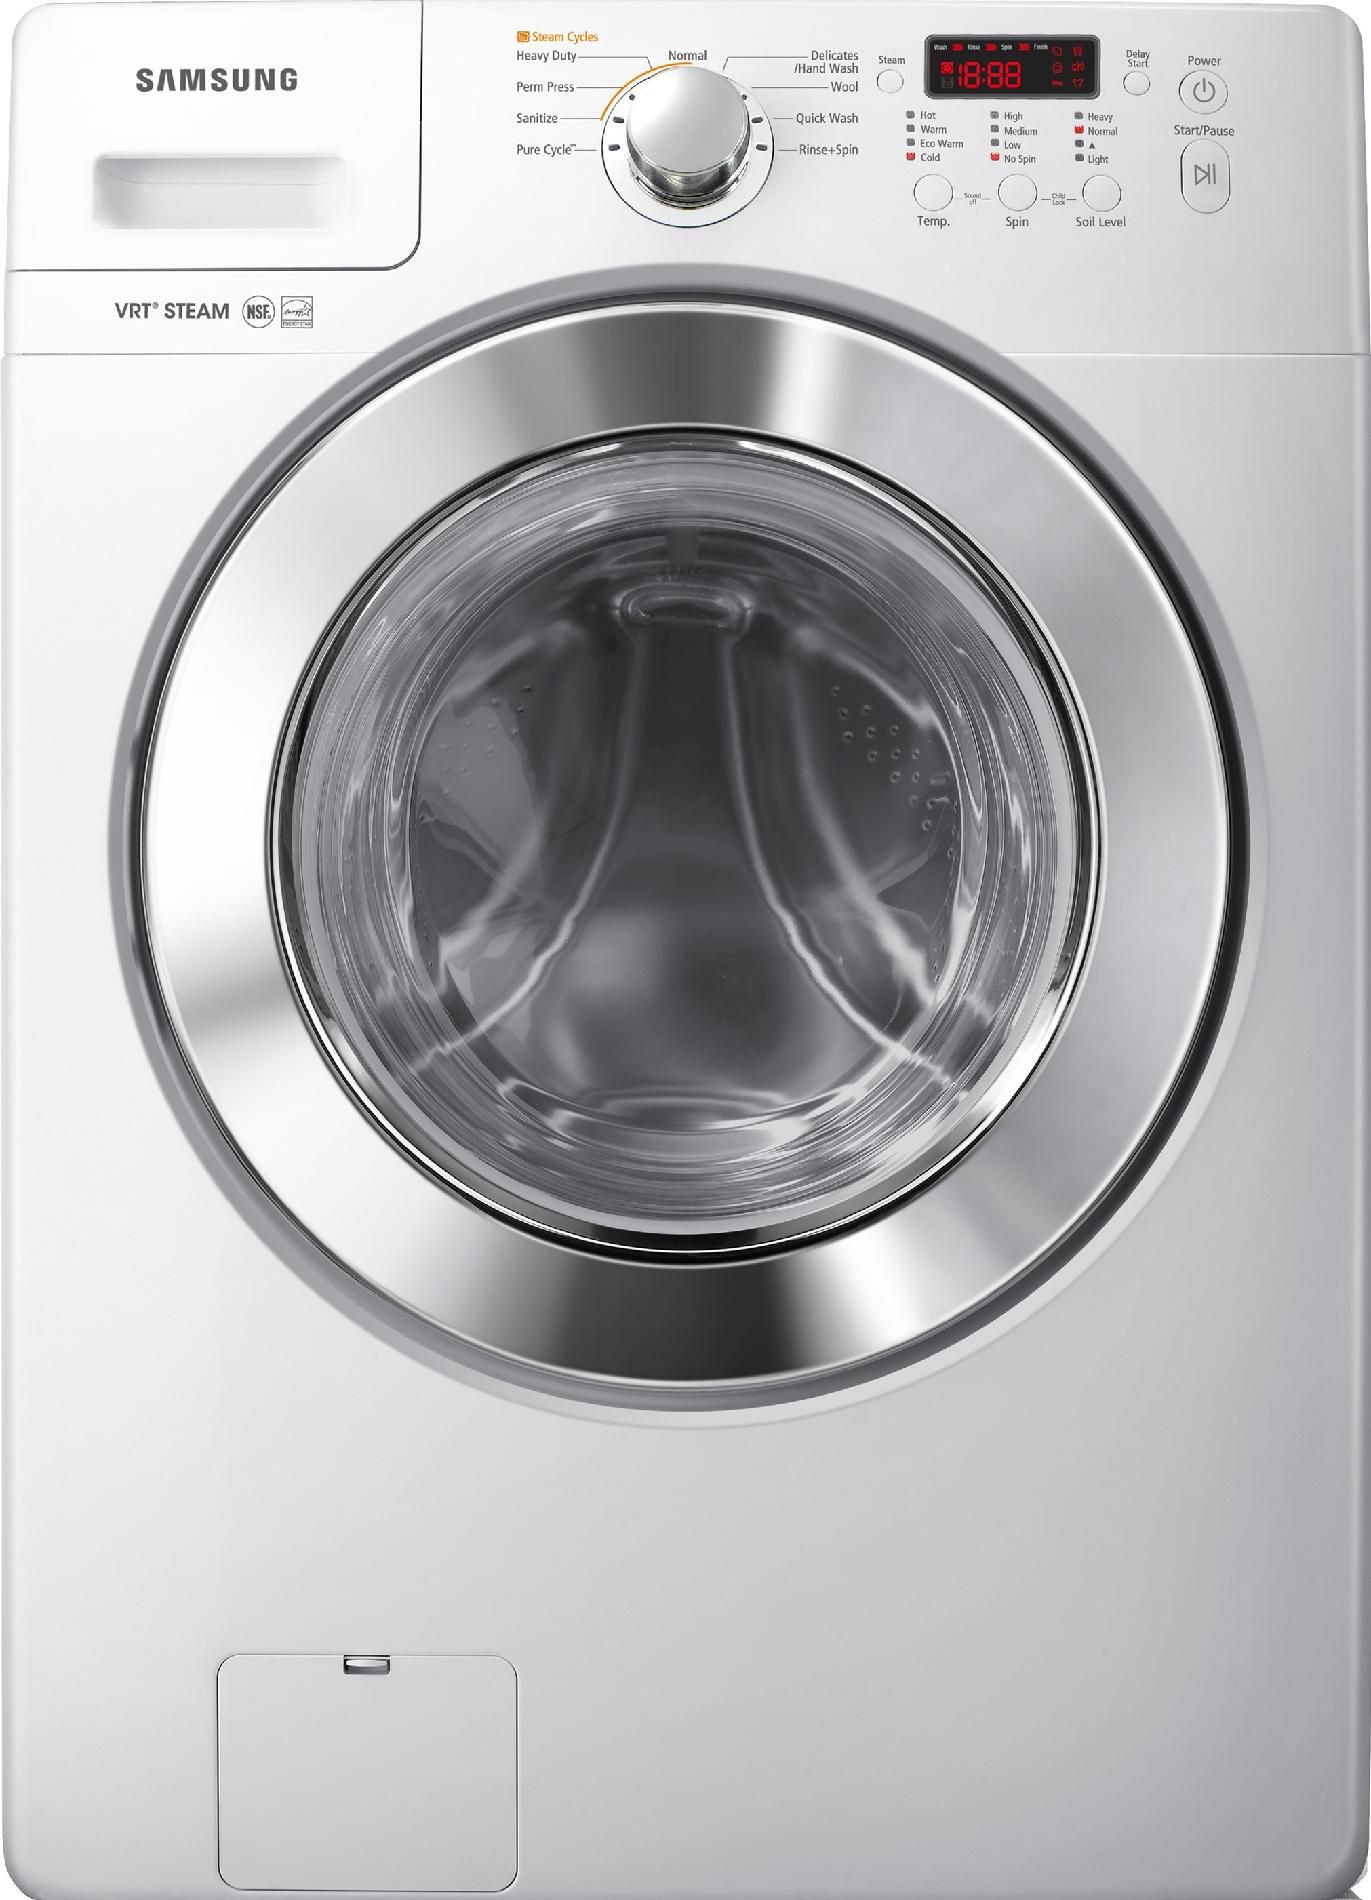 Samsung 3.6 cu. ft. Steam Front-Load Washer - White | Shop Your Way